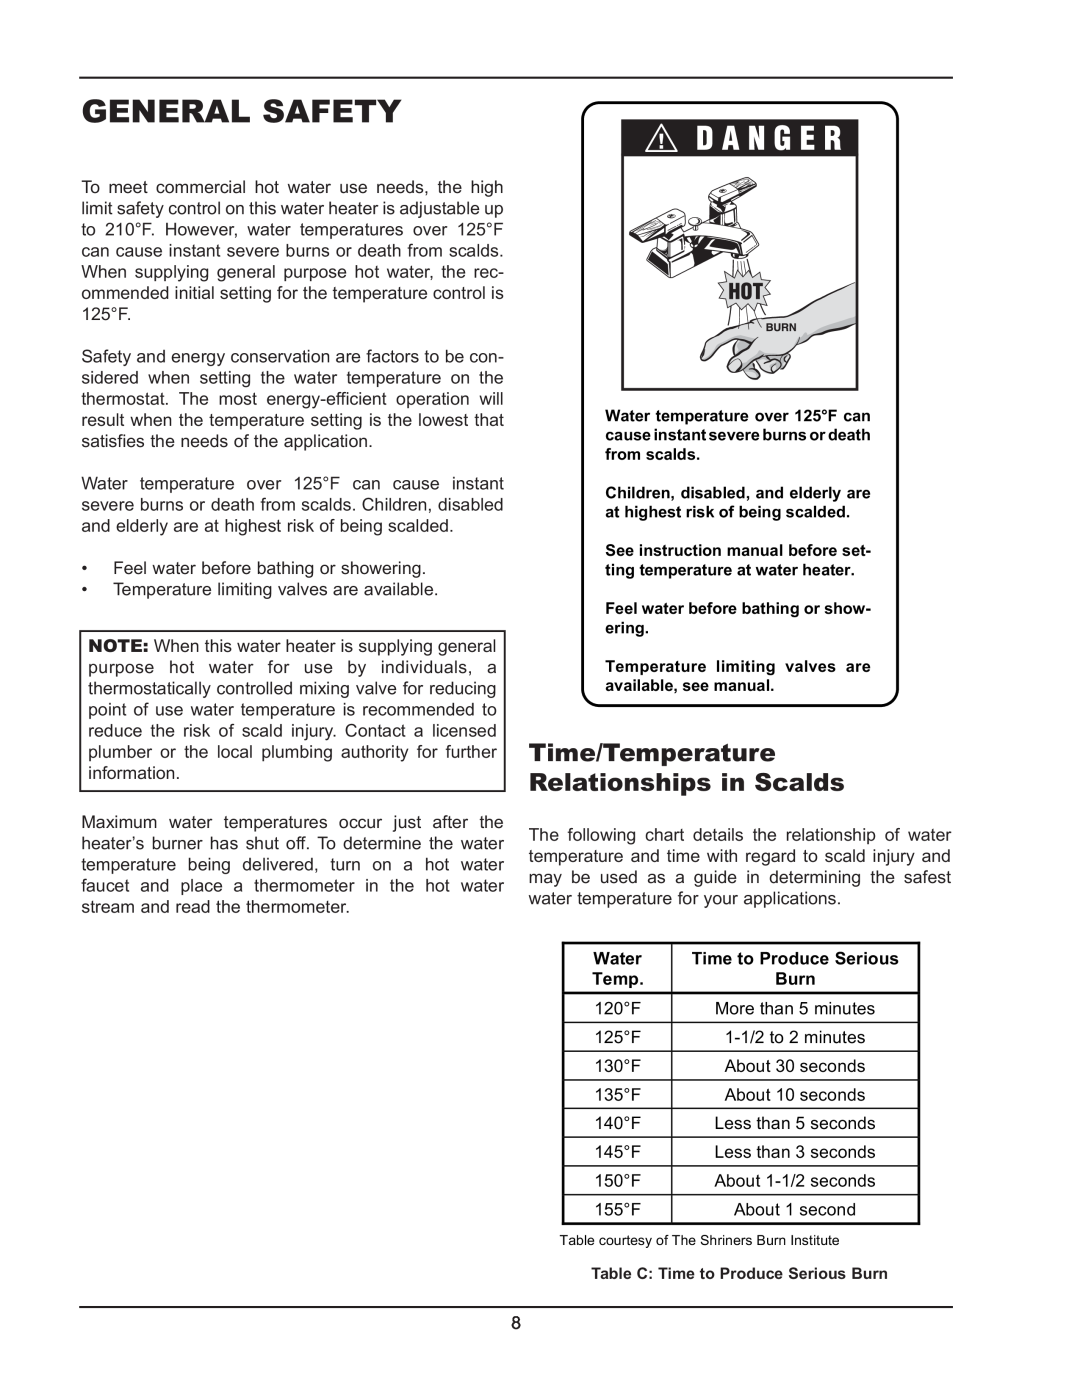 Raypak 992B-1262B manual General Safety, Time/Temperature Relationships in Scalds 